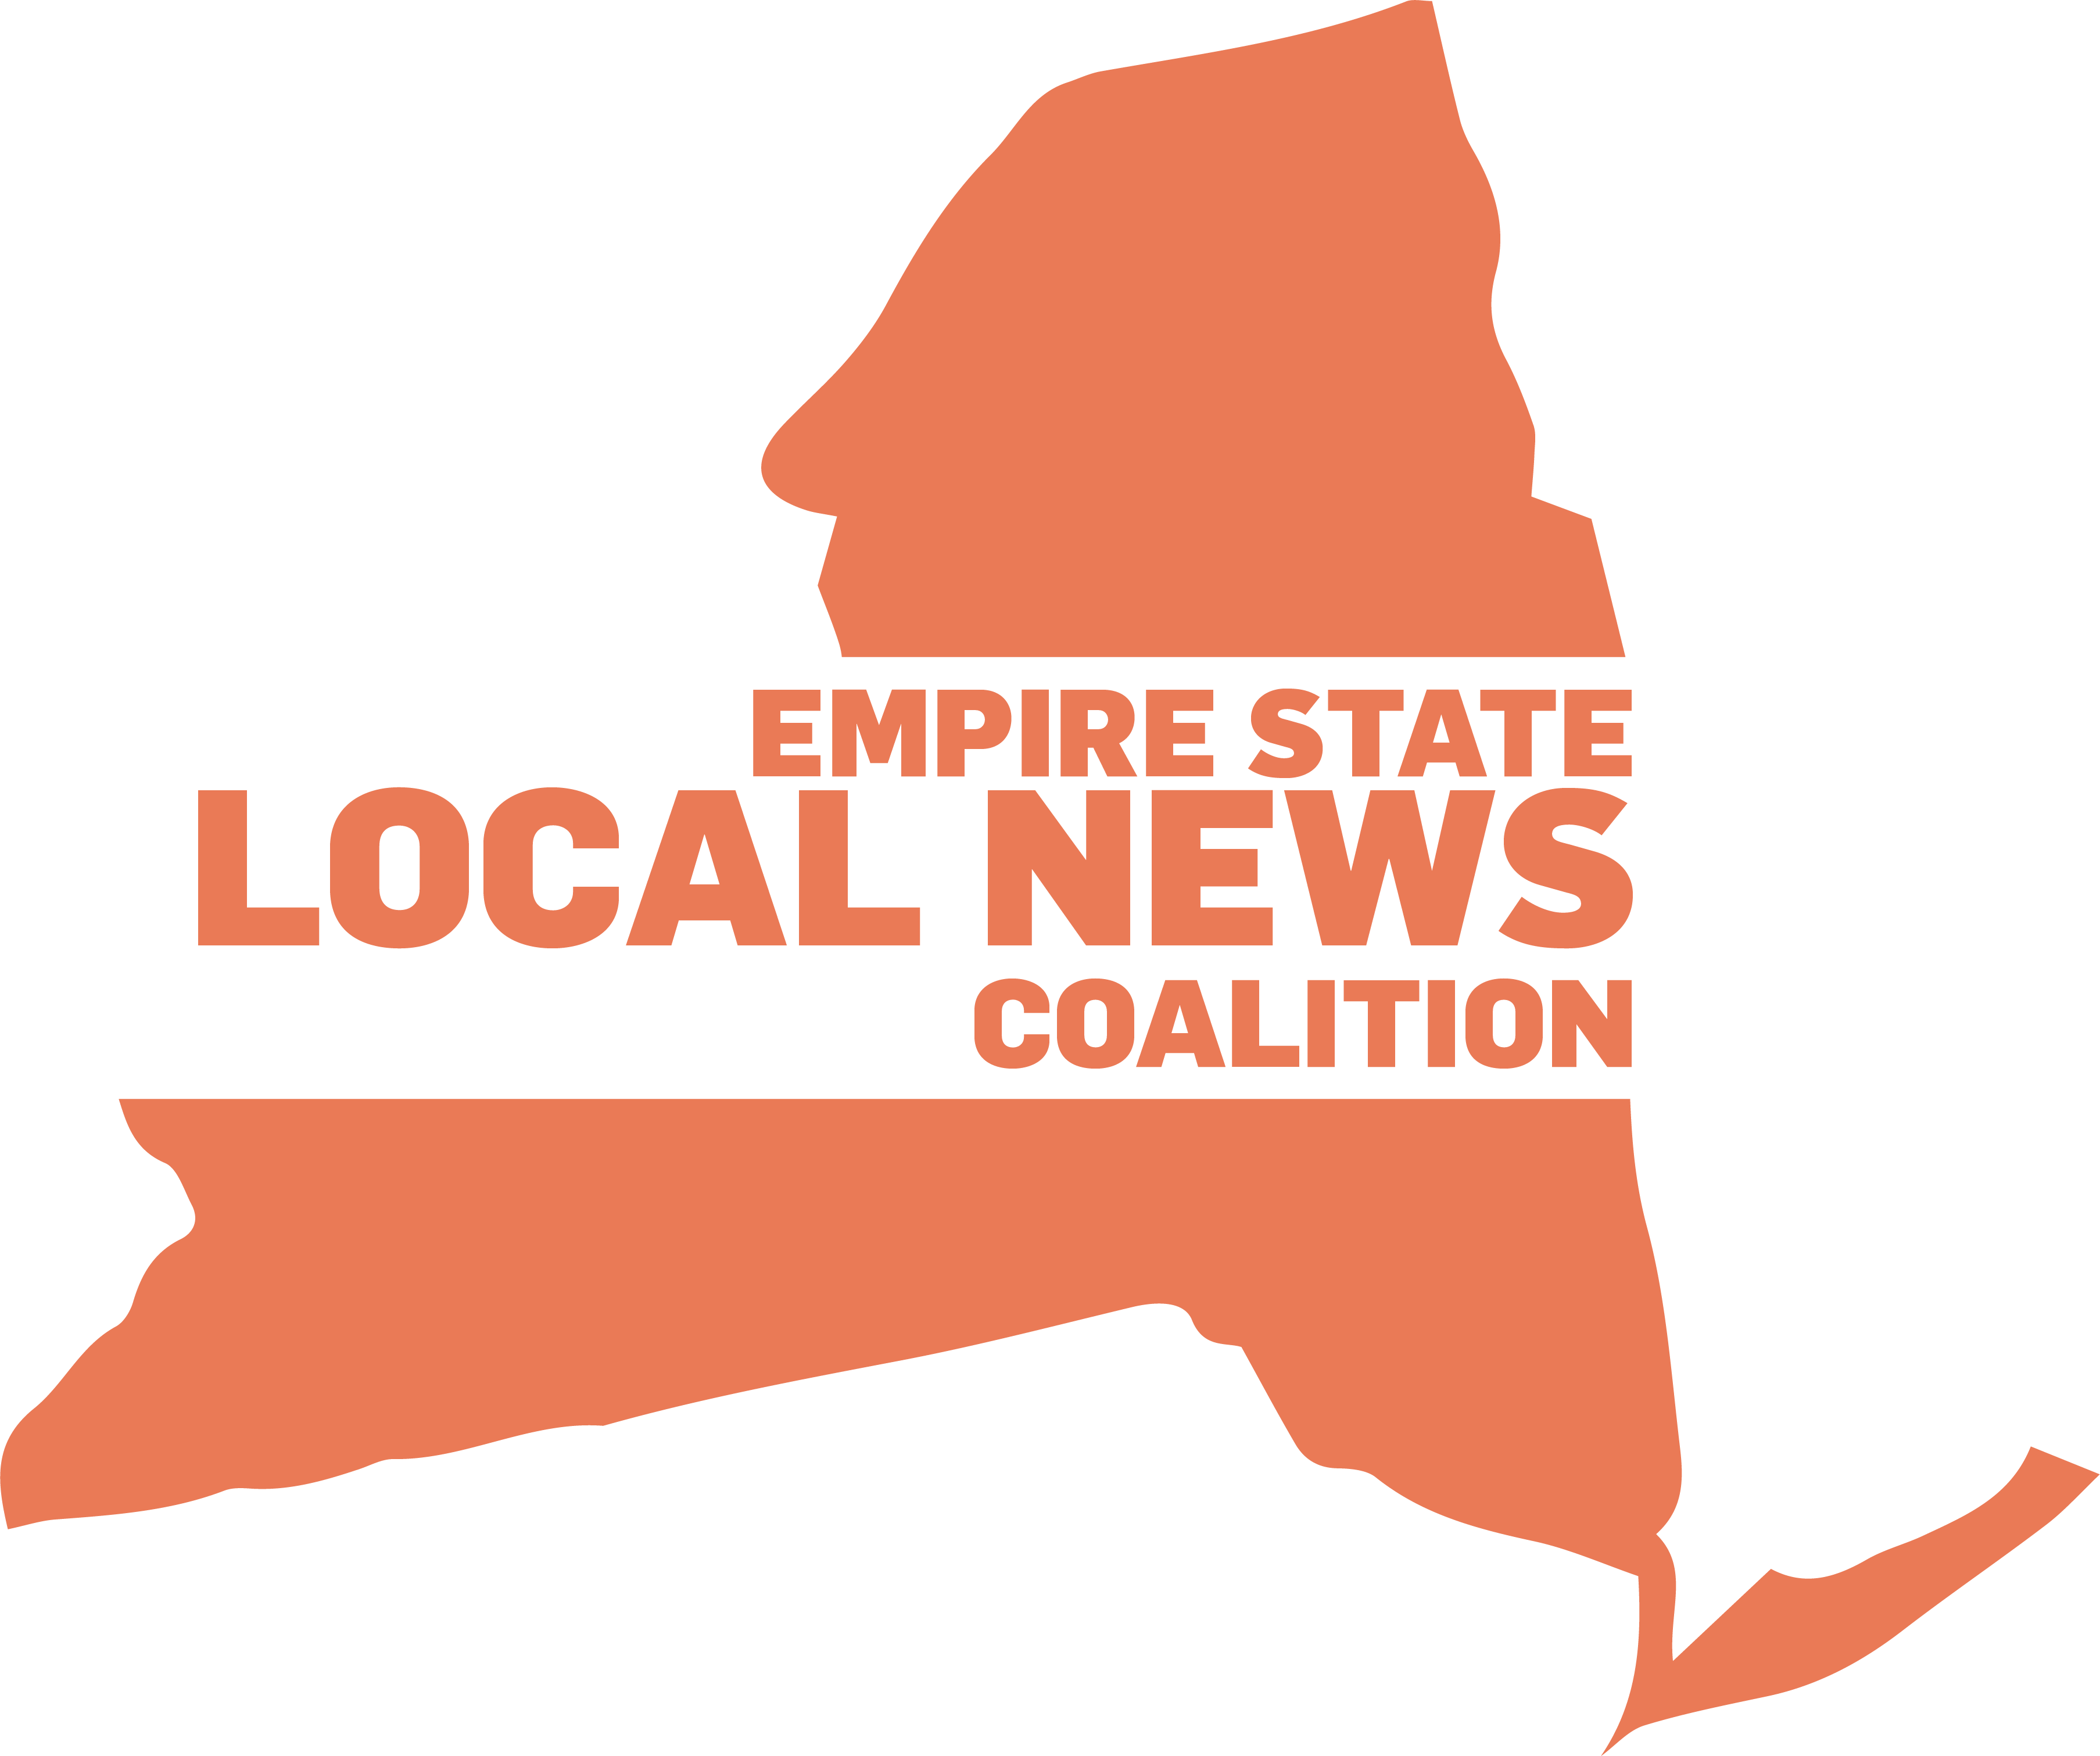 The Empire State Local News Coalition logo